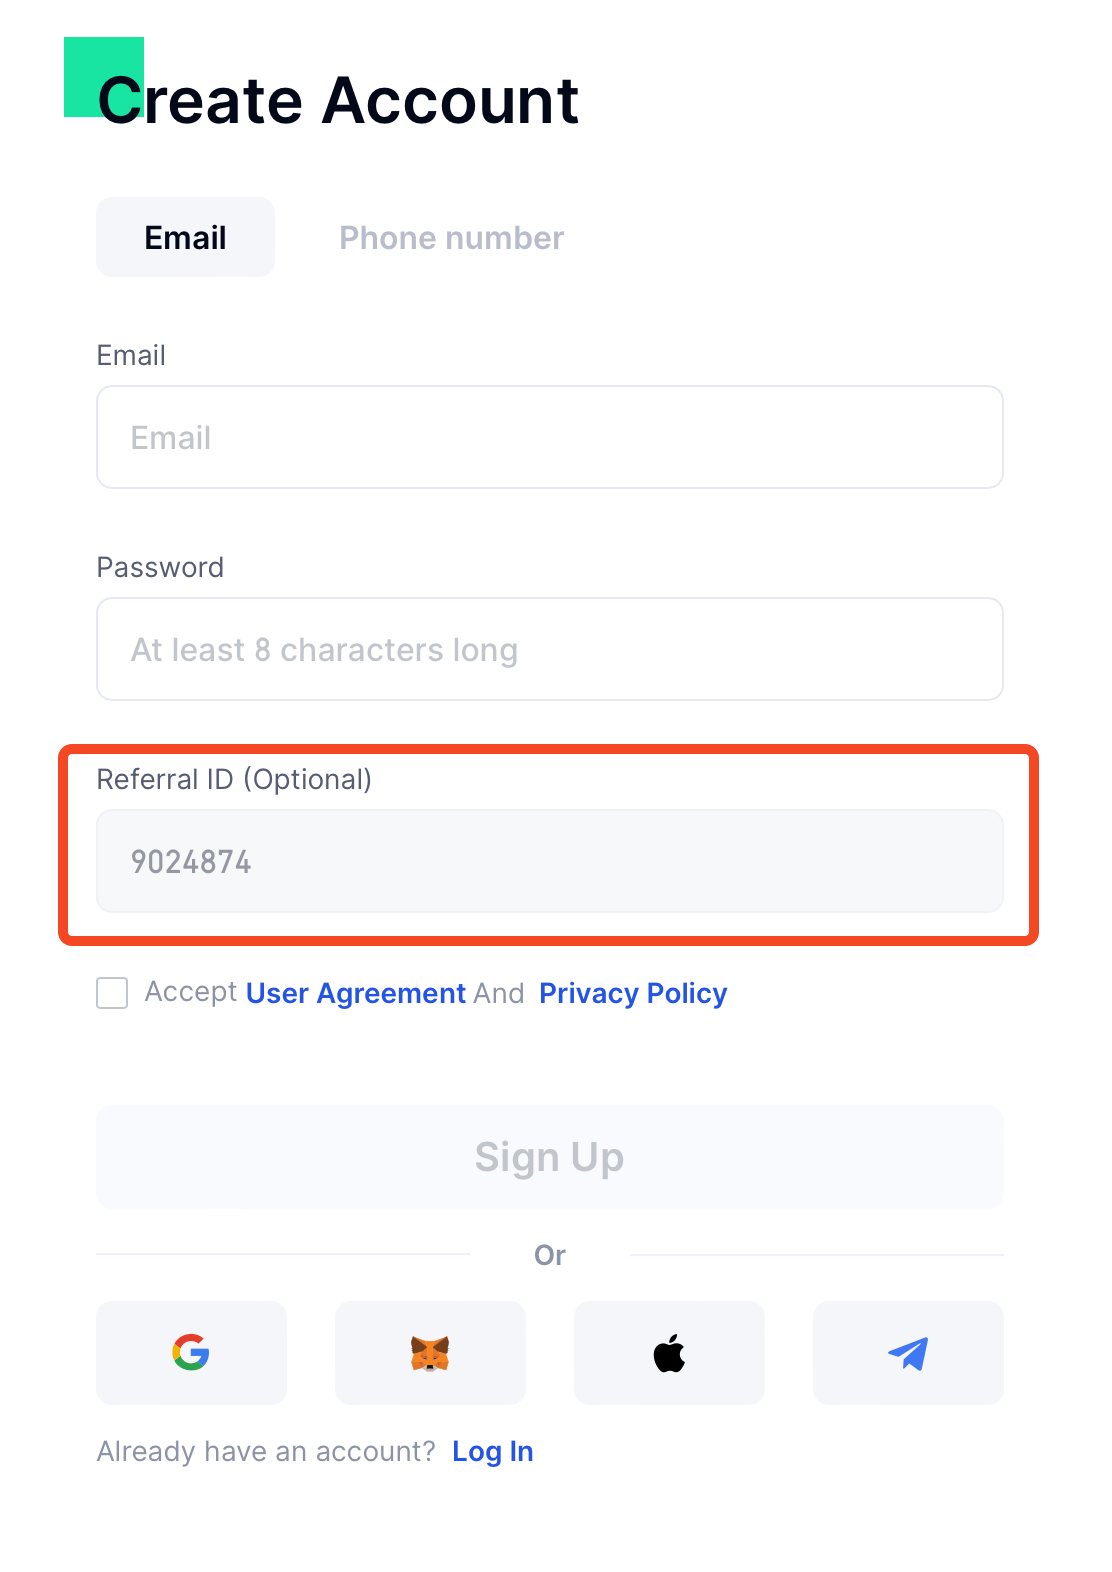 Registration Form using the Gate.io Referral Code 9024874